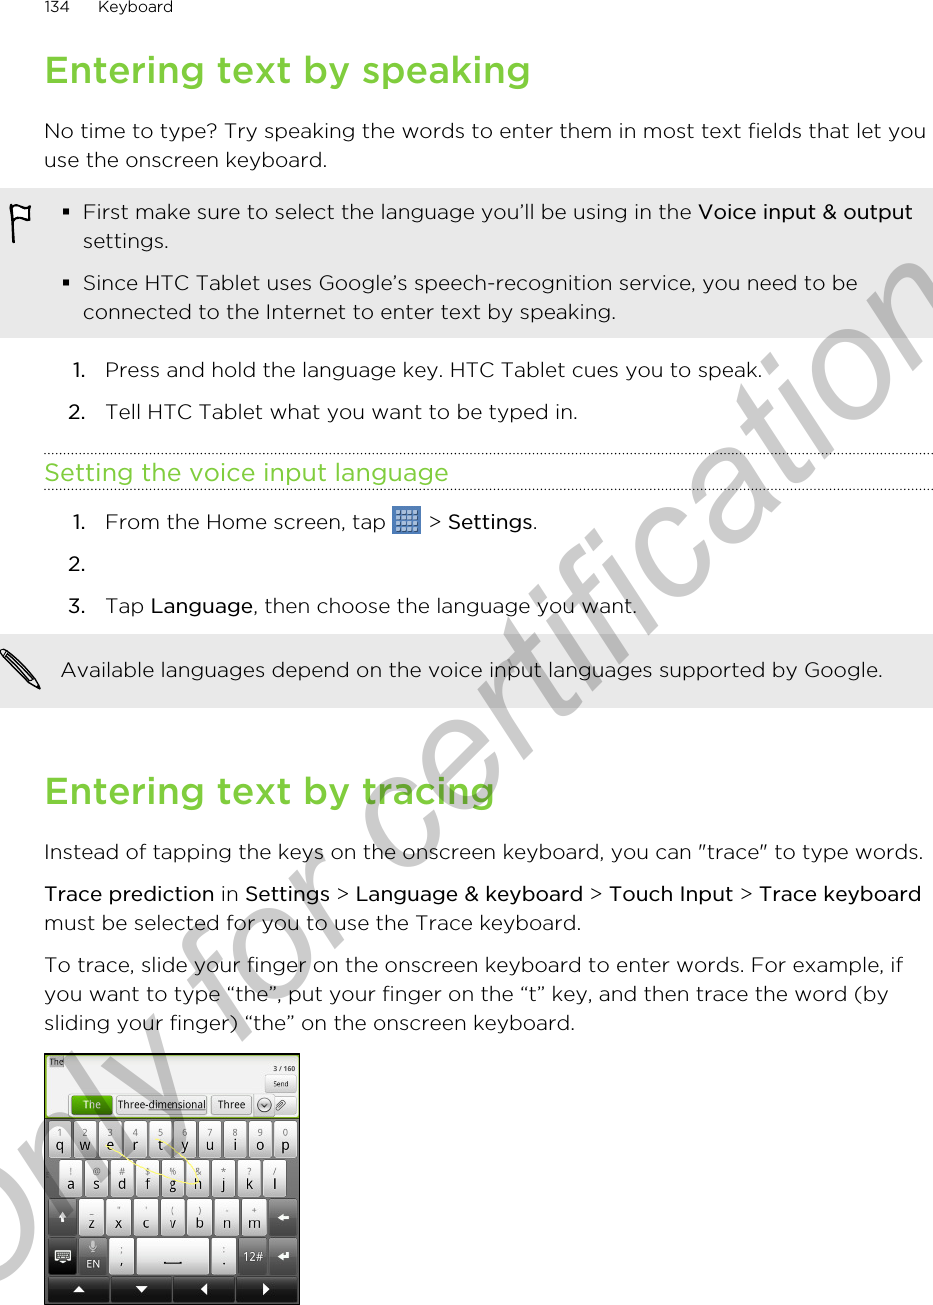 Entering text by speakingNo time to type? Try speaking the words to enter them in most text fields that let youuse the onscreen keyboard.§First make sure to select the language you’ll be using in the Voice input &amp; outputsettings.§Since HTC Tablet uses Google’s speech-recognition service, you need to beconnected to the Internet to enter text by speaking.1. Press and hold the language key. HTC Tablet cues you to speak.2. Tell HTC Tablet what you want to be typed in.Setting the voice input language1. From the Home screen, tap   &gt; Settings.2.3. Tap Language, then choose the language you want. Available languages depend on the voice input languages supported by Google.Entering text by tracingInstead of tapping the keys on the onscreen keyboard, you can &quot;trace&quot; to type words.Trace prediction in Settings &gt; Language &amp; keyboard &gt; Touch Input &gt; Trace keyboardmust be selected for you to use the Trace keyboard.To trace, slide your finger on the onscreen keyboard to enter words. For example, ifyou want to type “the”, put your finger on the “t” key, and then trace the word (bysliding your finger) “the” on the onscreen keyboard.134 KeyboardOnly for certification